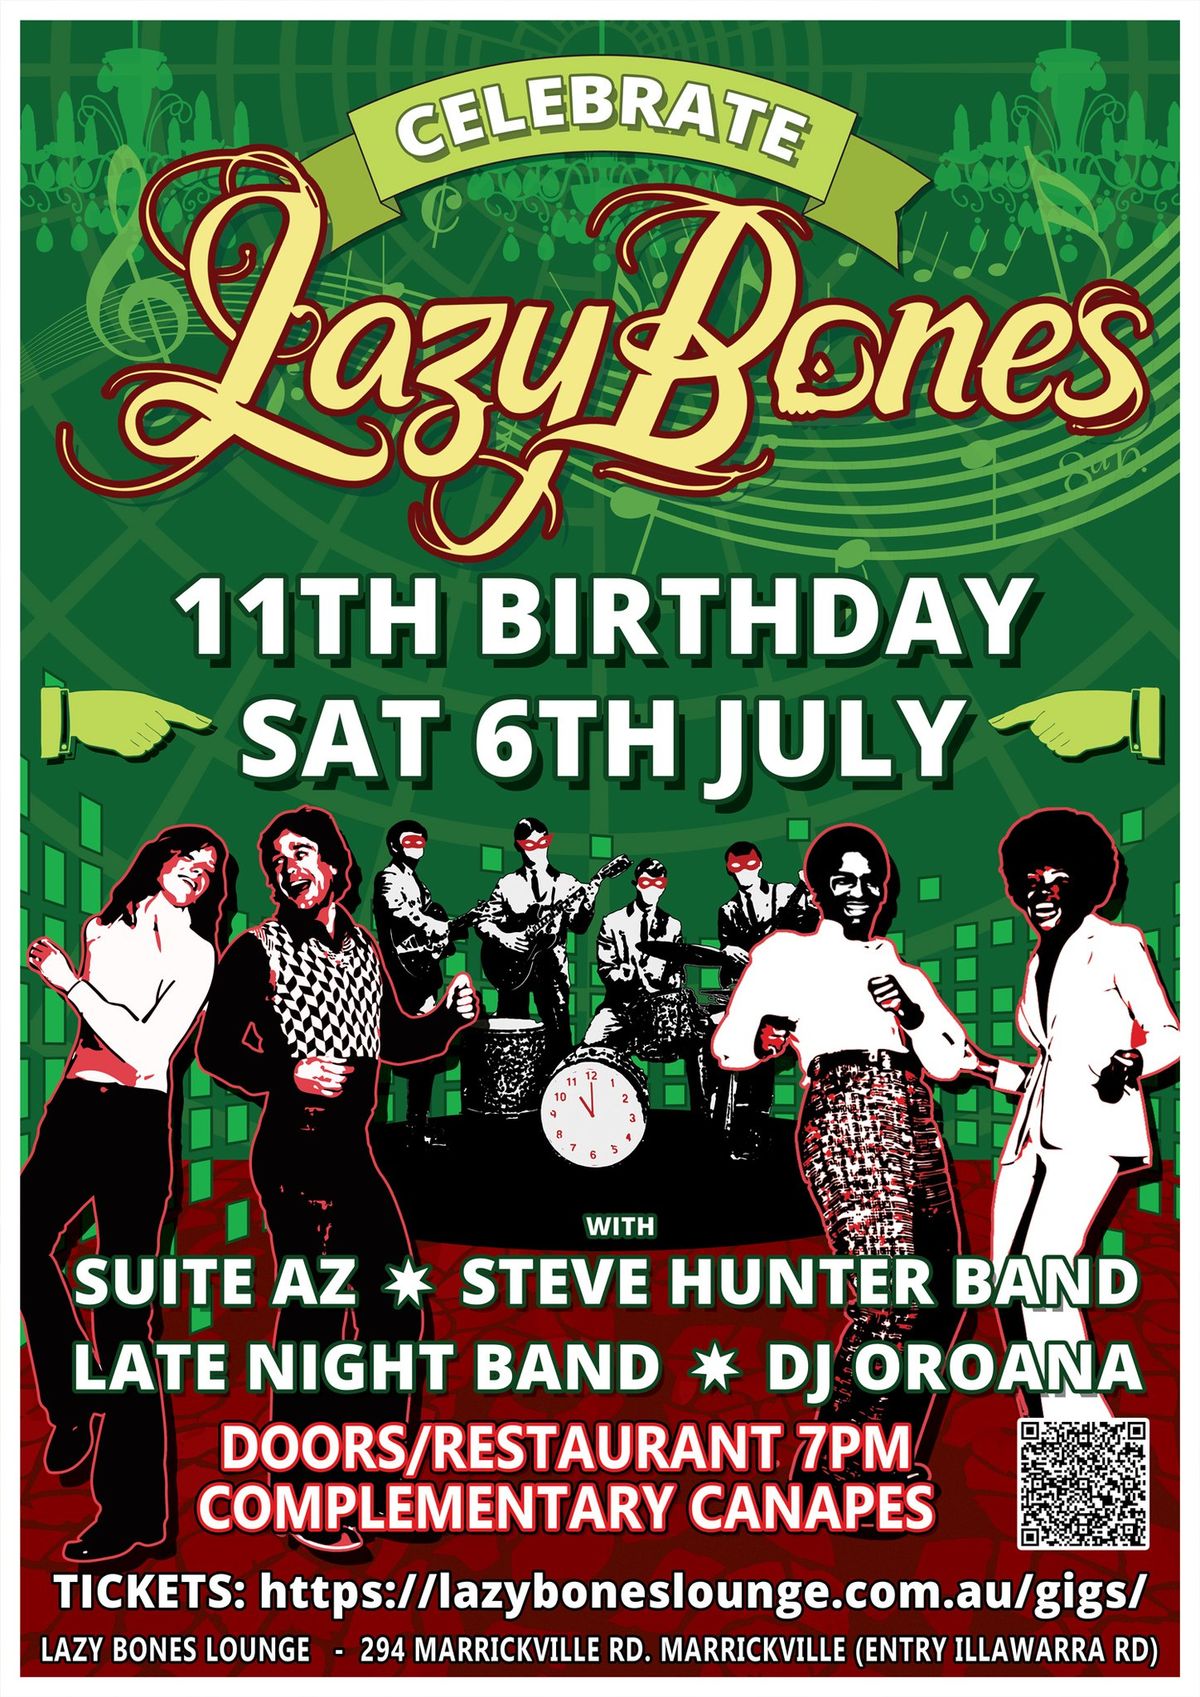 Lazybones\u2019 11th B'day Party! With Suite Az + FONIX + more!